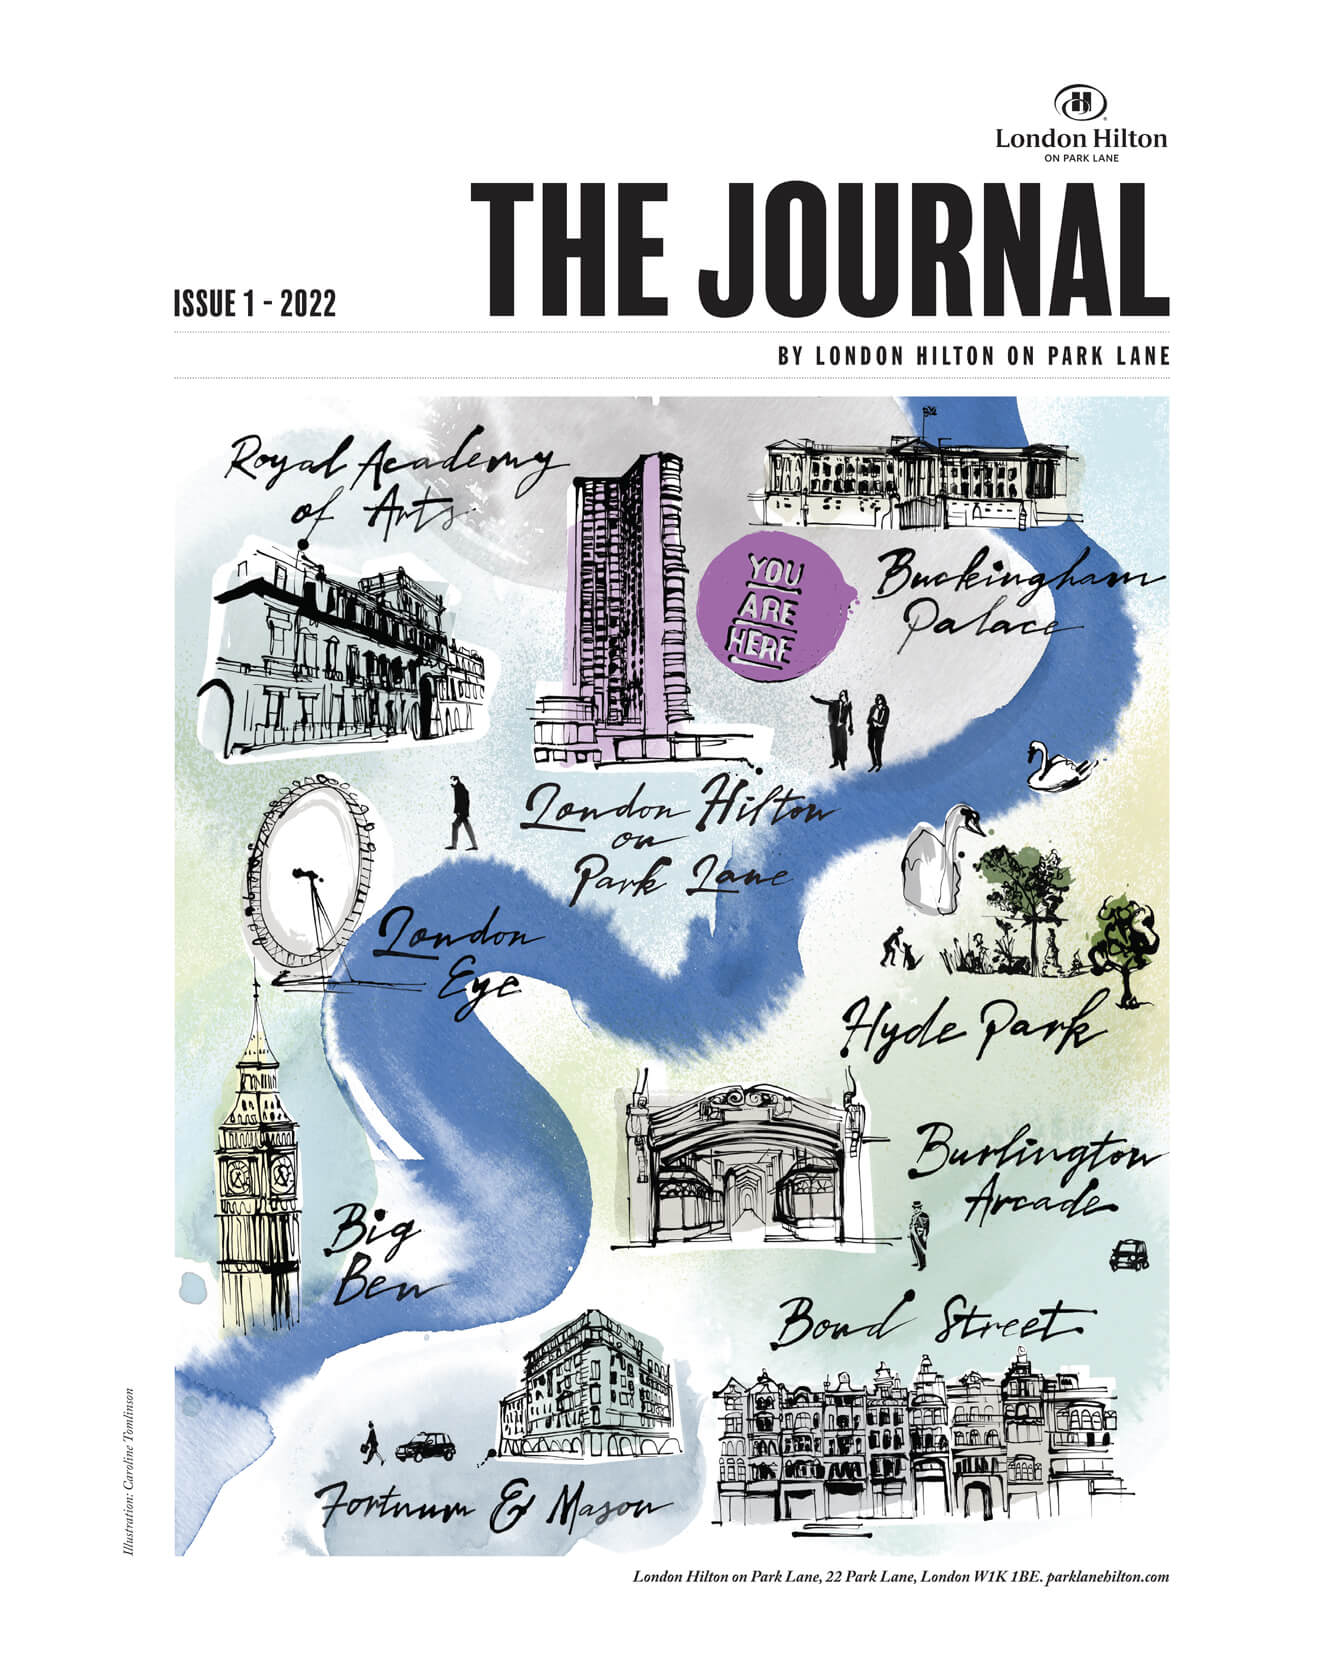 Architecture – Hilton Hotel Park Lane London Illustrated Cover for ‘The Journal’